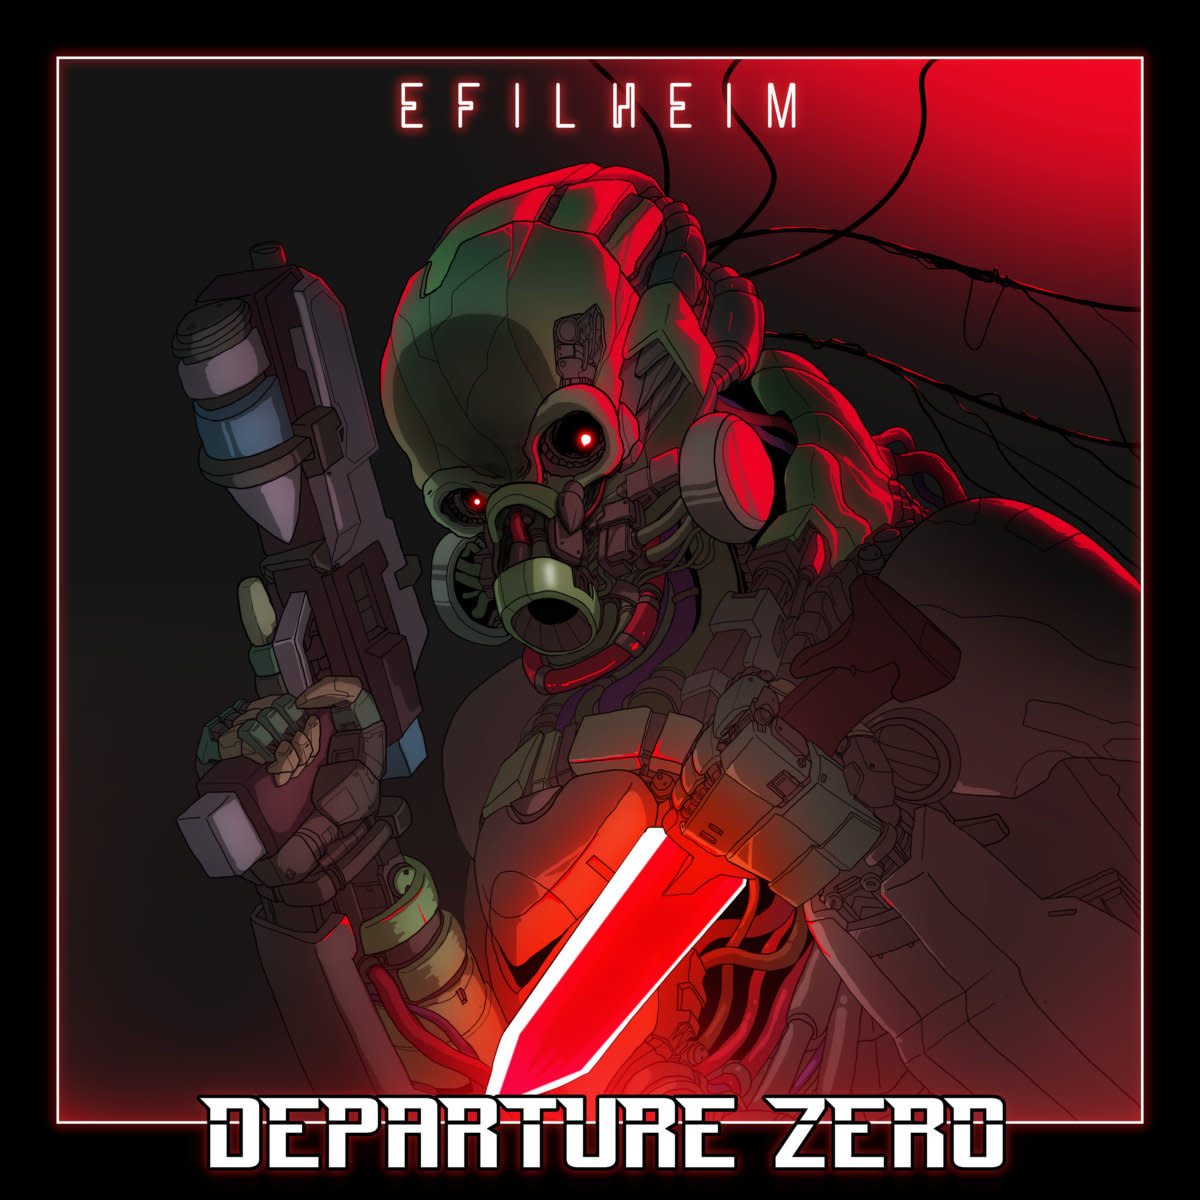 synth-album-review-departure-zero-by-efilheim-and-guests